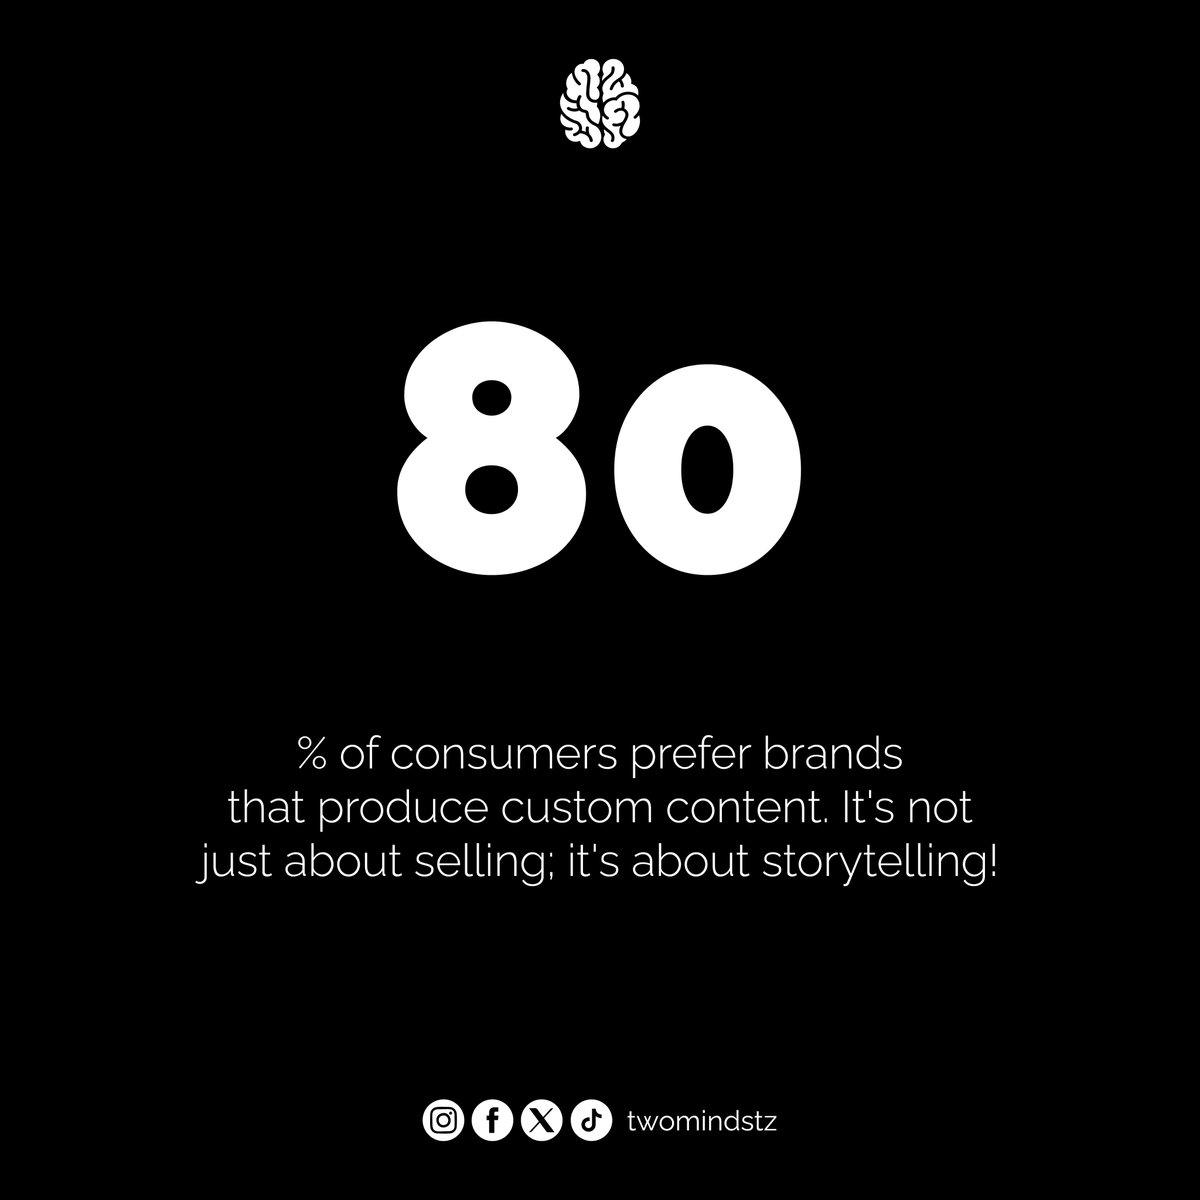 Did you know? According to recent data, 80% of consumers prefer brands that produce custom content.

@twomindstz can help with compelling narratives tailored to your brand.

#twomindstz #contentstrategy #branding #brandstrategist #graphicdesign #sales #selling #digitalmarketing